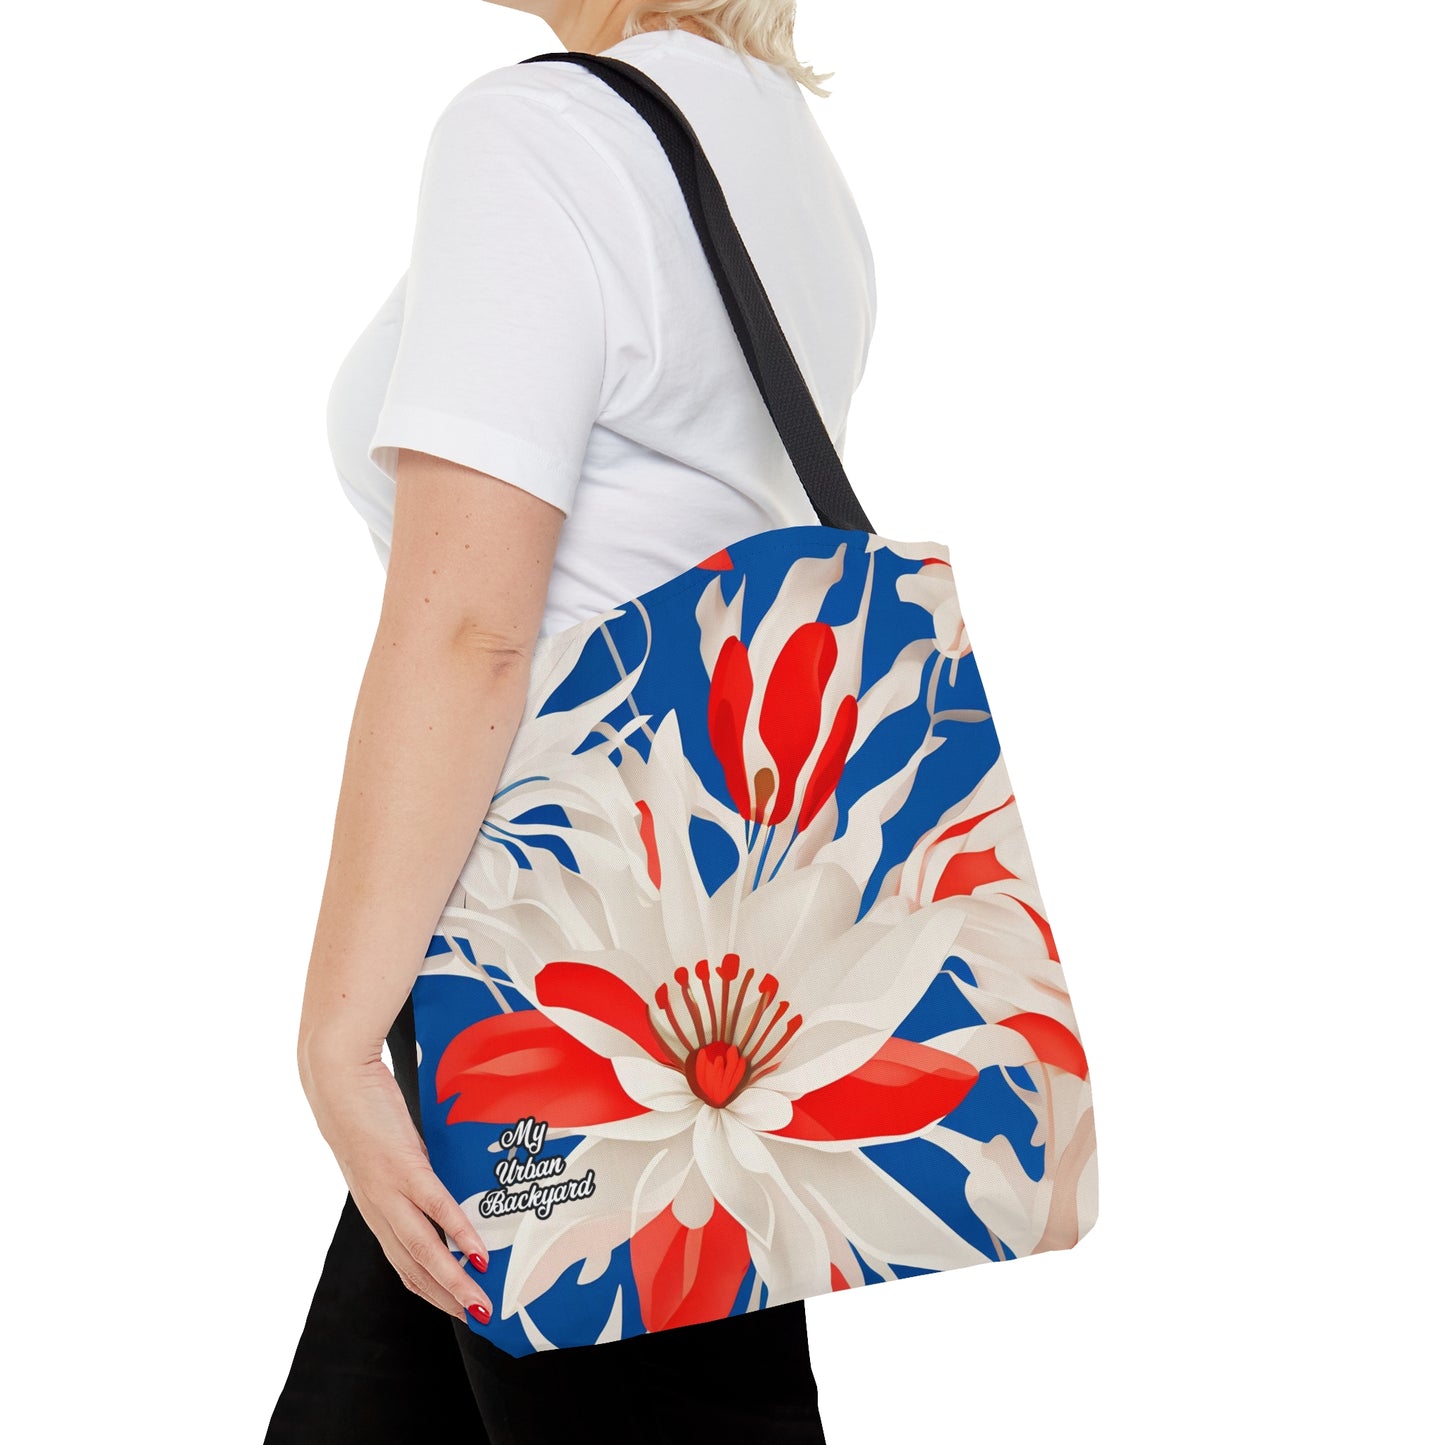 Red White & Blue Flowers, Tote Bag for Everyday Use - Durable and Functional